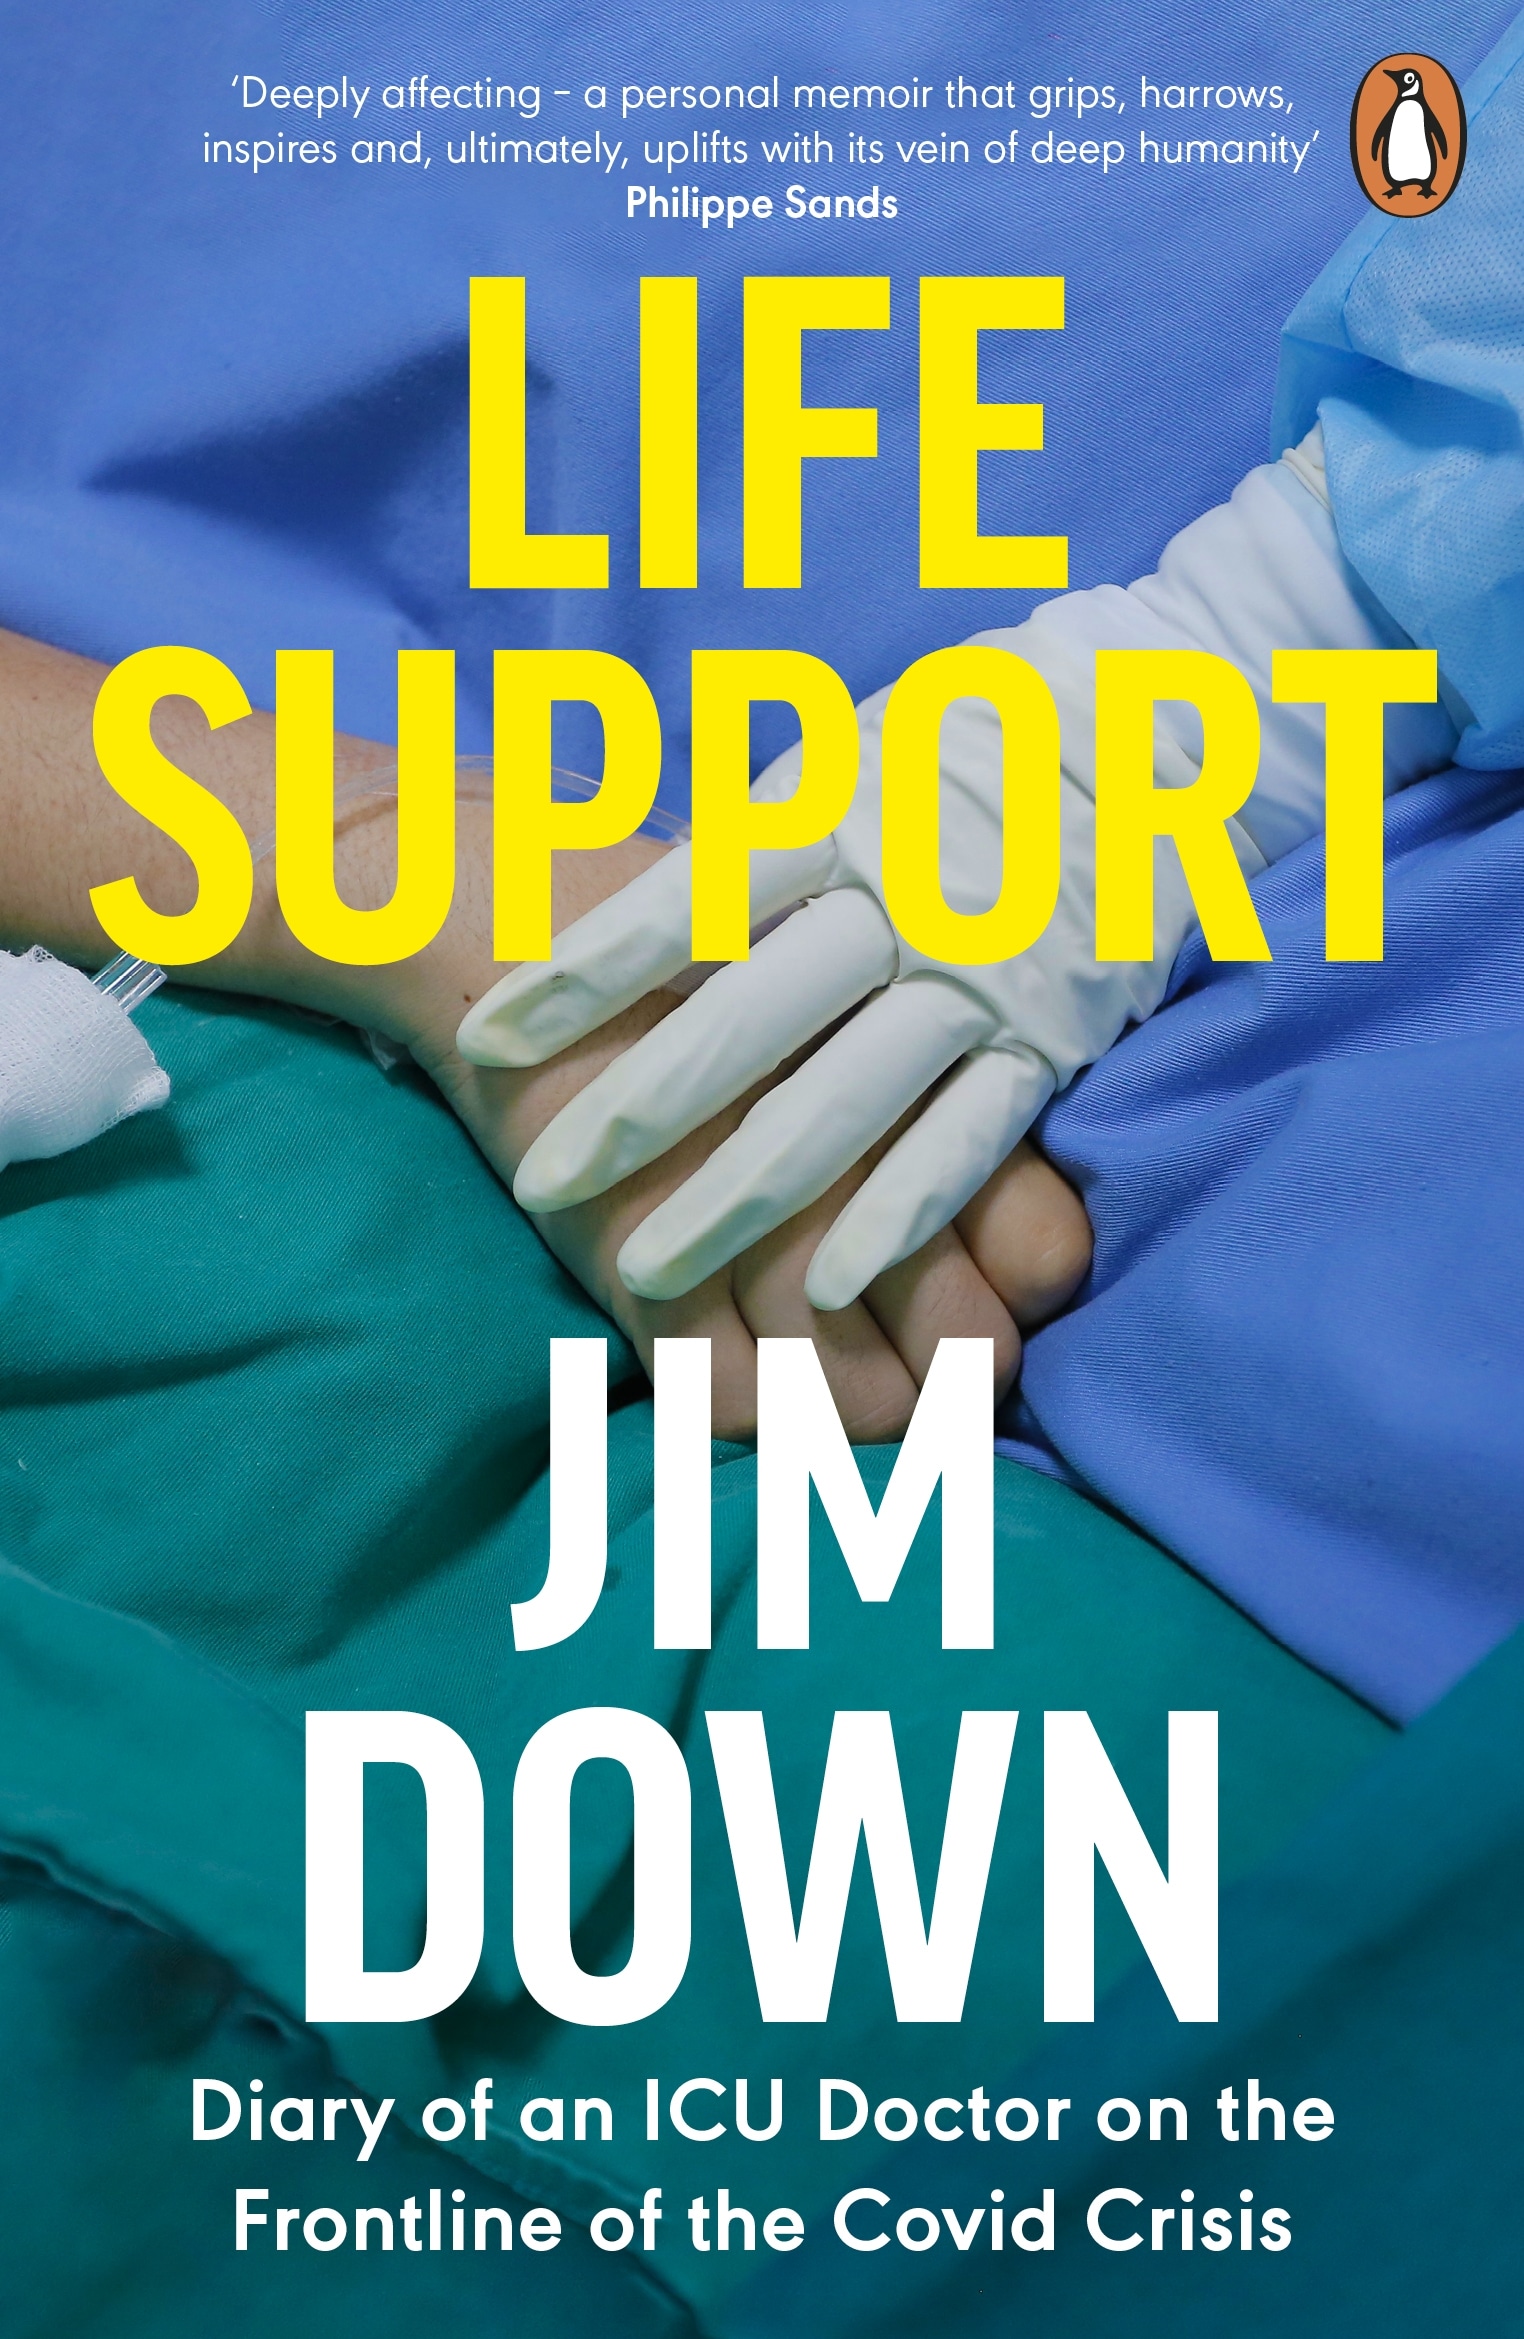 Book “Life Support” by Jim Down — November 4, 2021